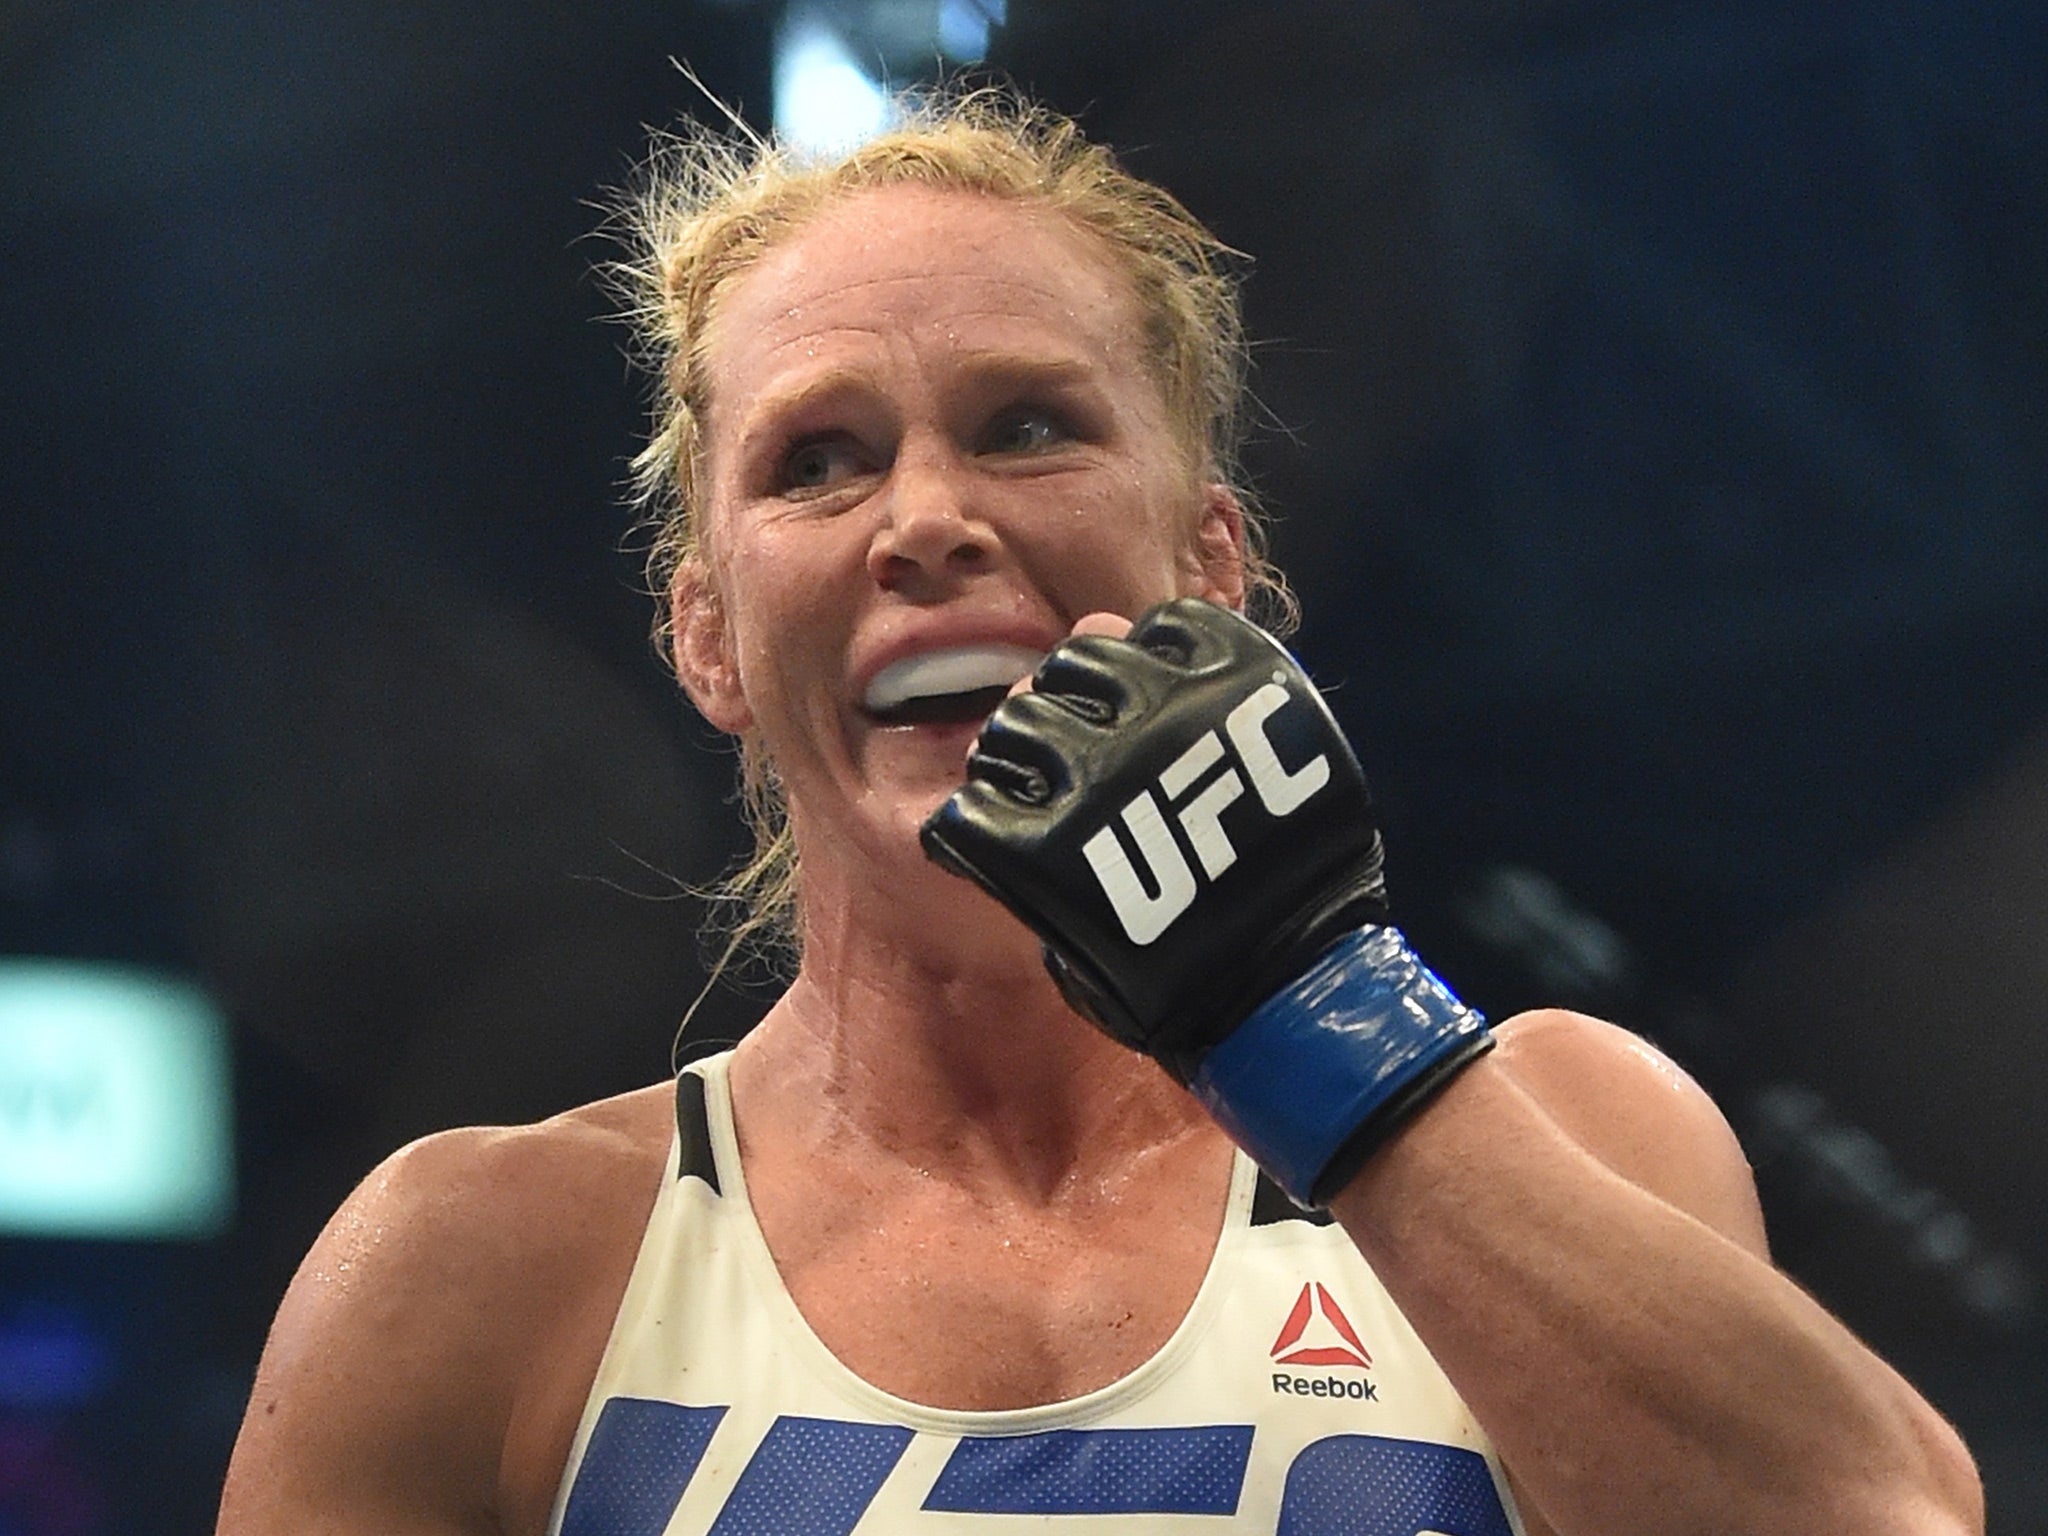 Holly Holm will attempt to become the first woman to win belts in two weight classes